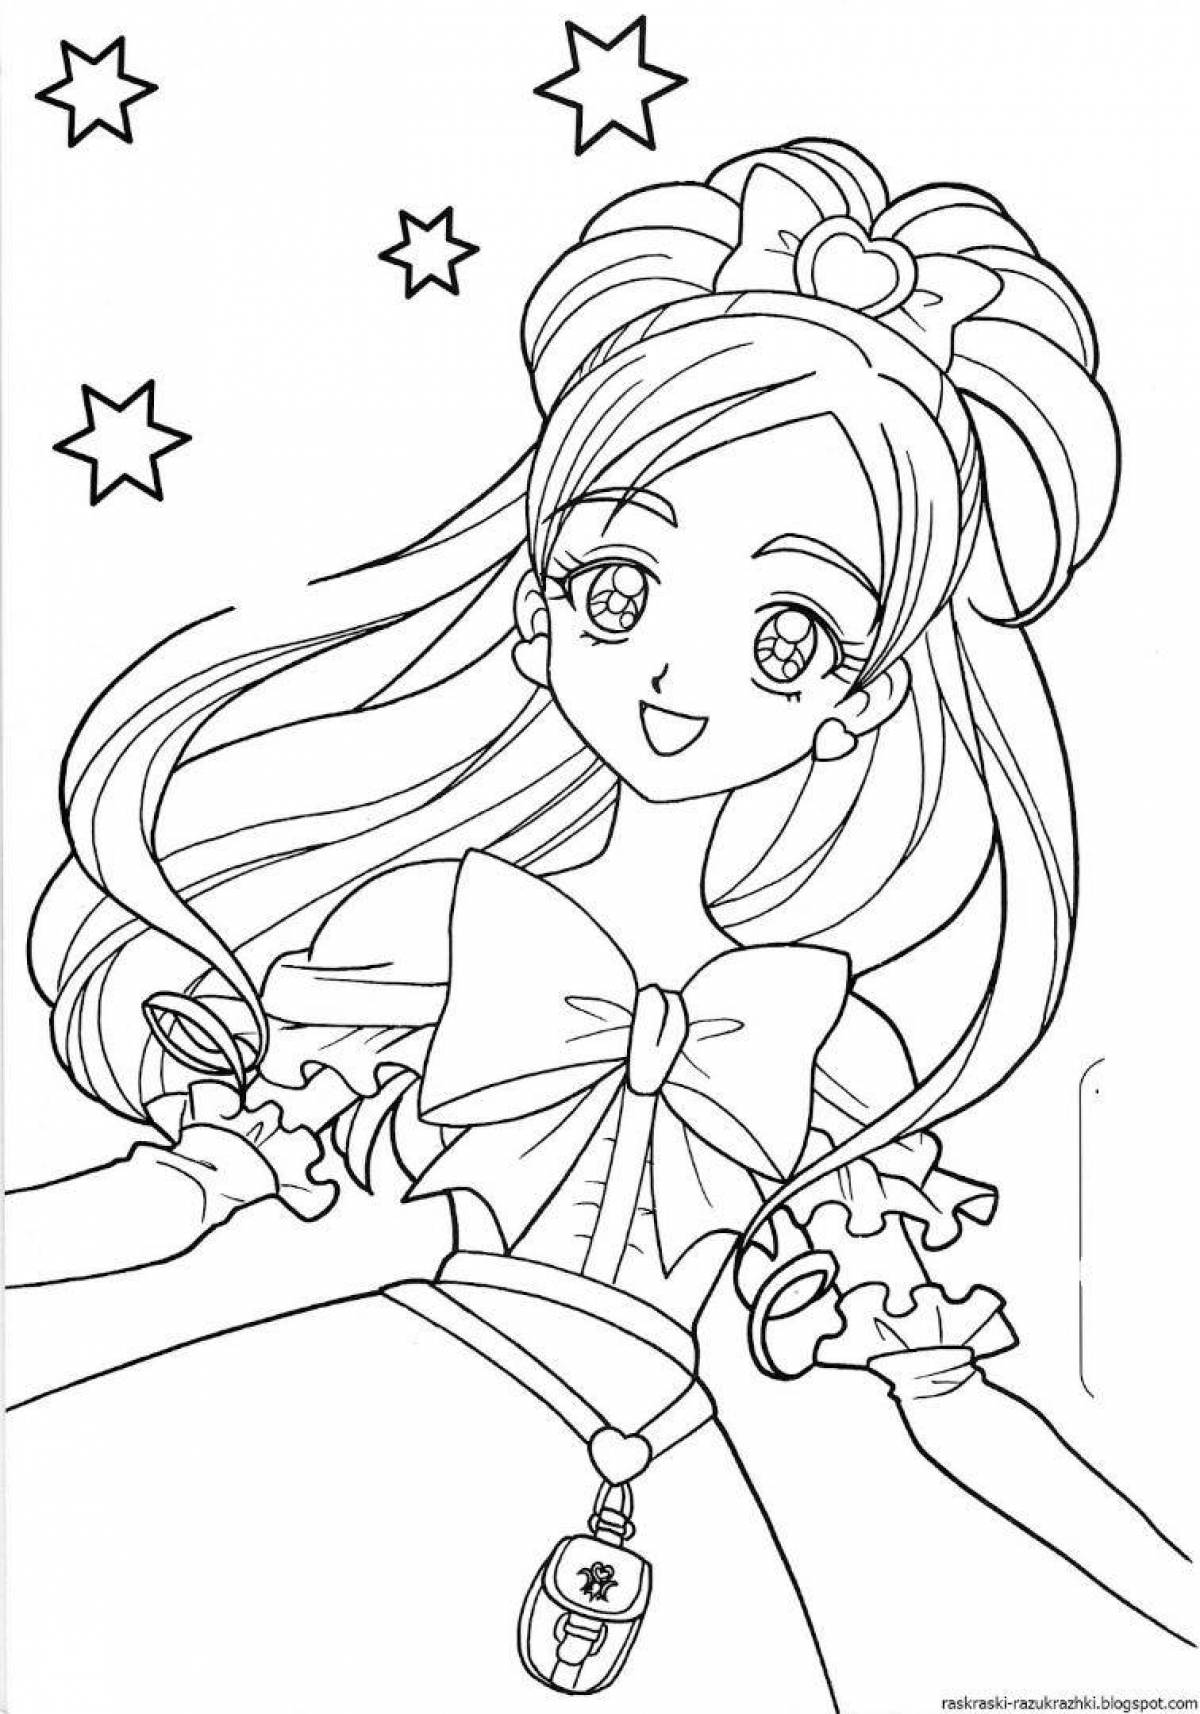 Glamor coloring page 11 for girls